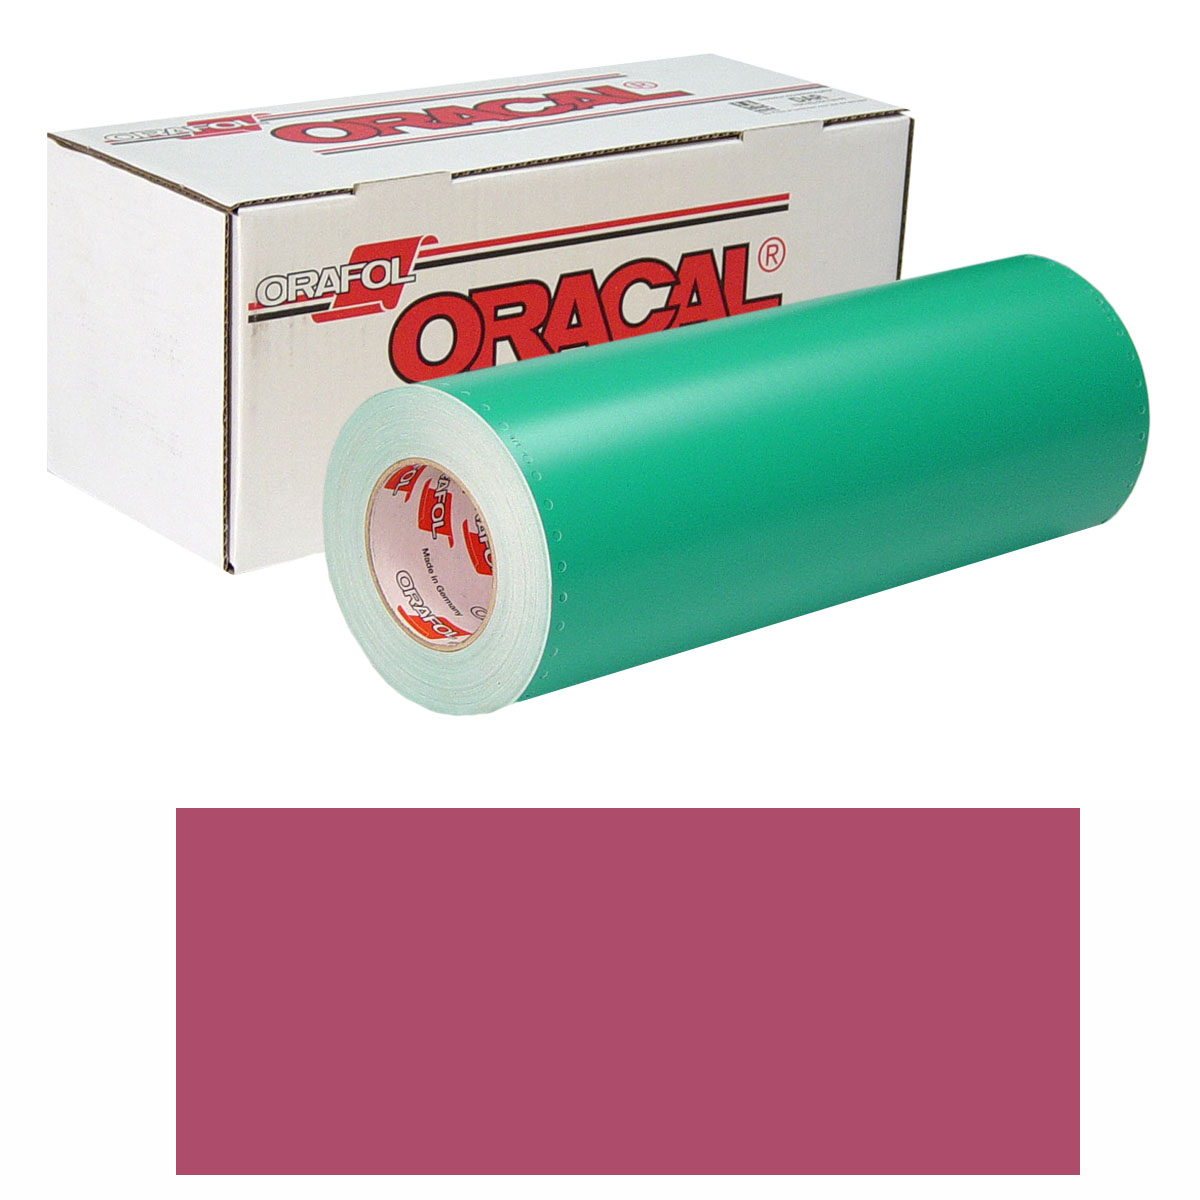 ORACAL 8500 15in X 10yd 008 Heather Red